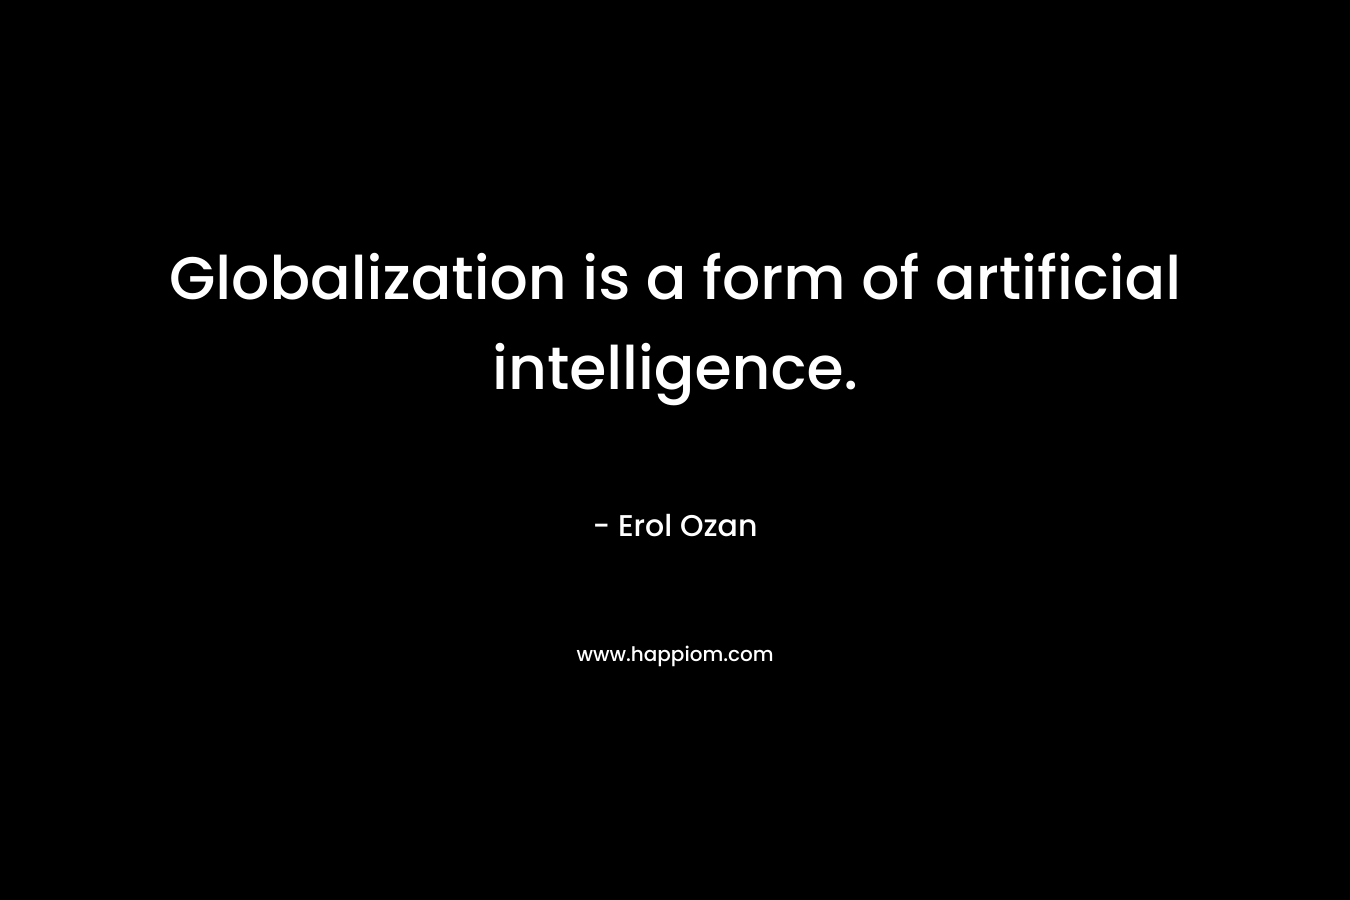 Globalization is a form of artificial intelligence.